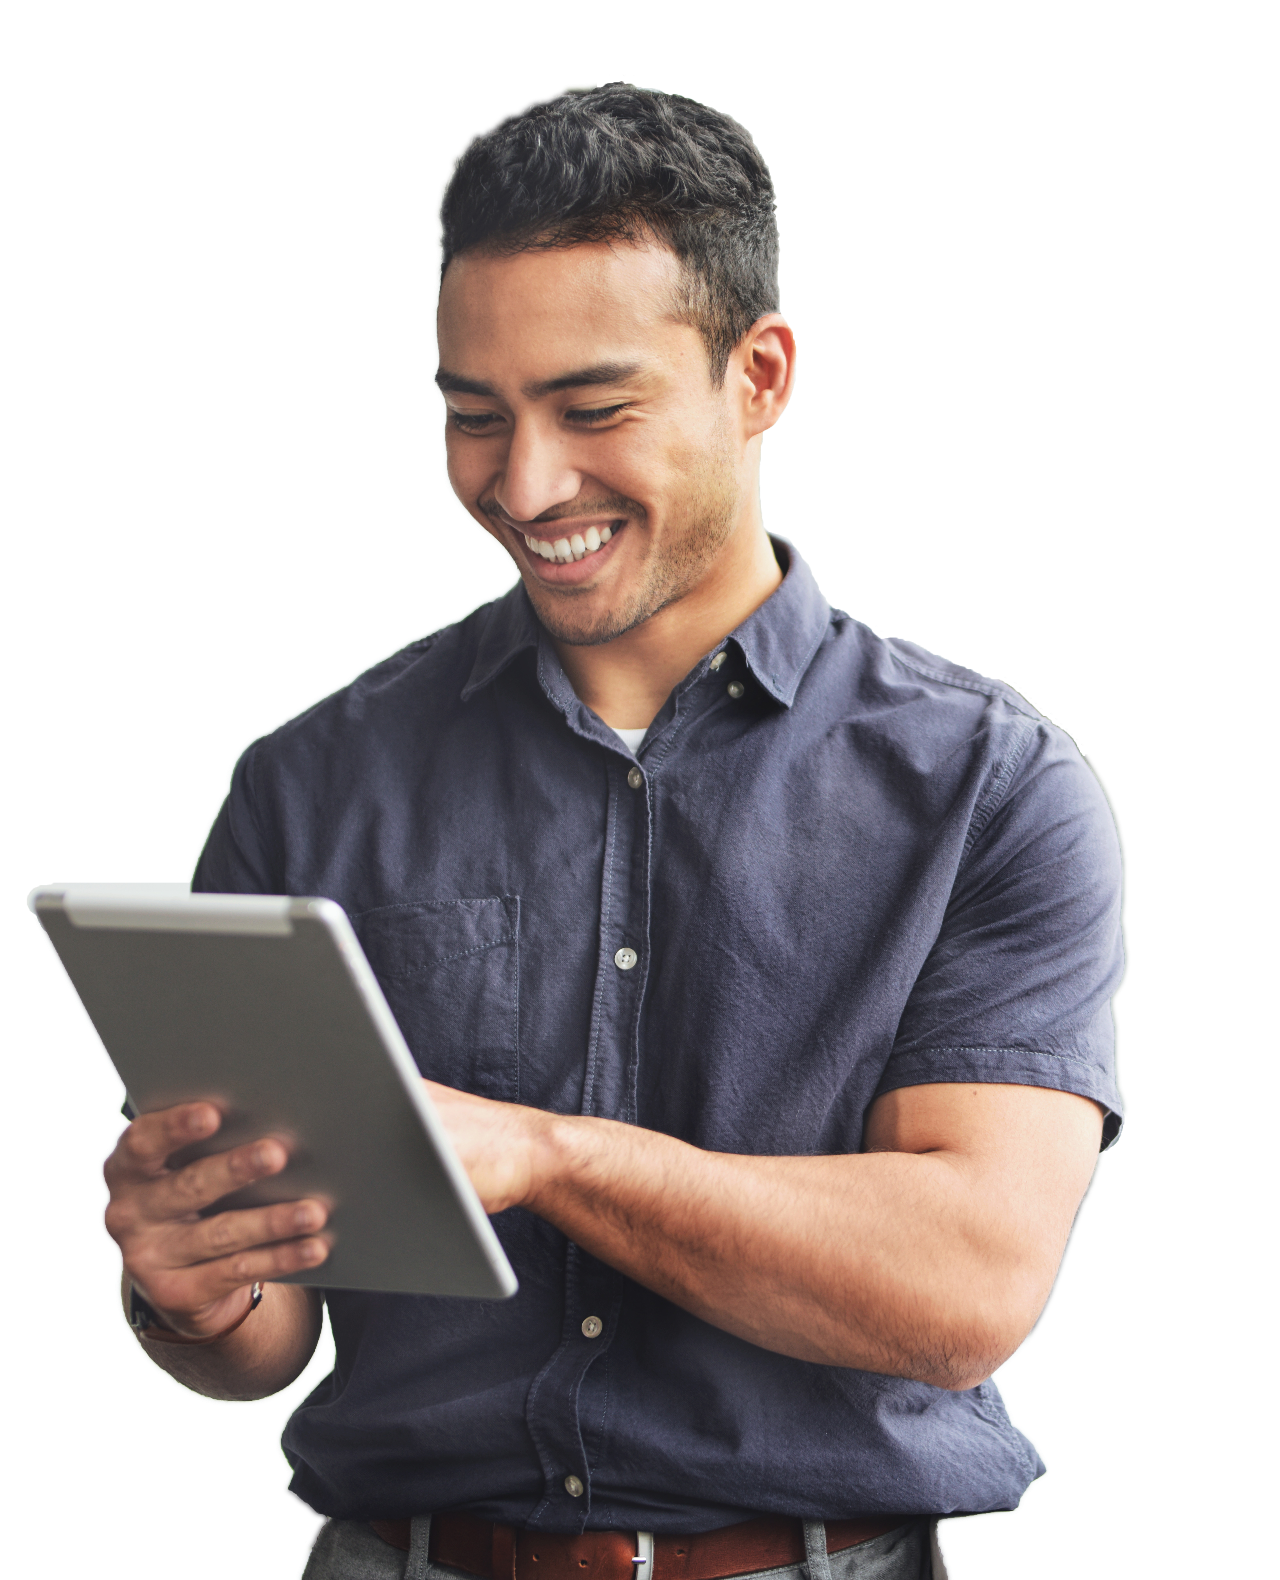 Guy smiling and using a tablet.